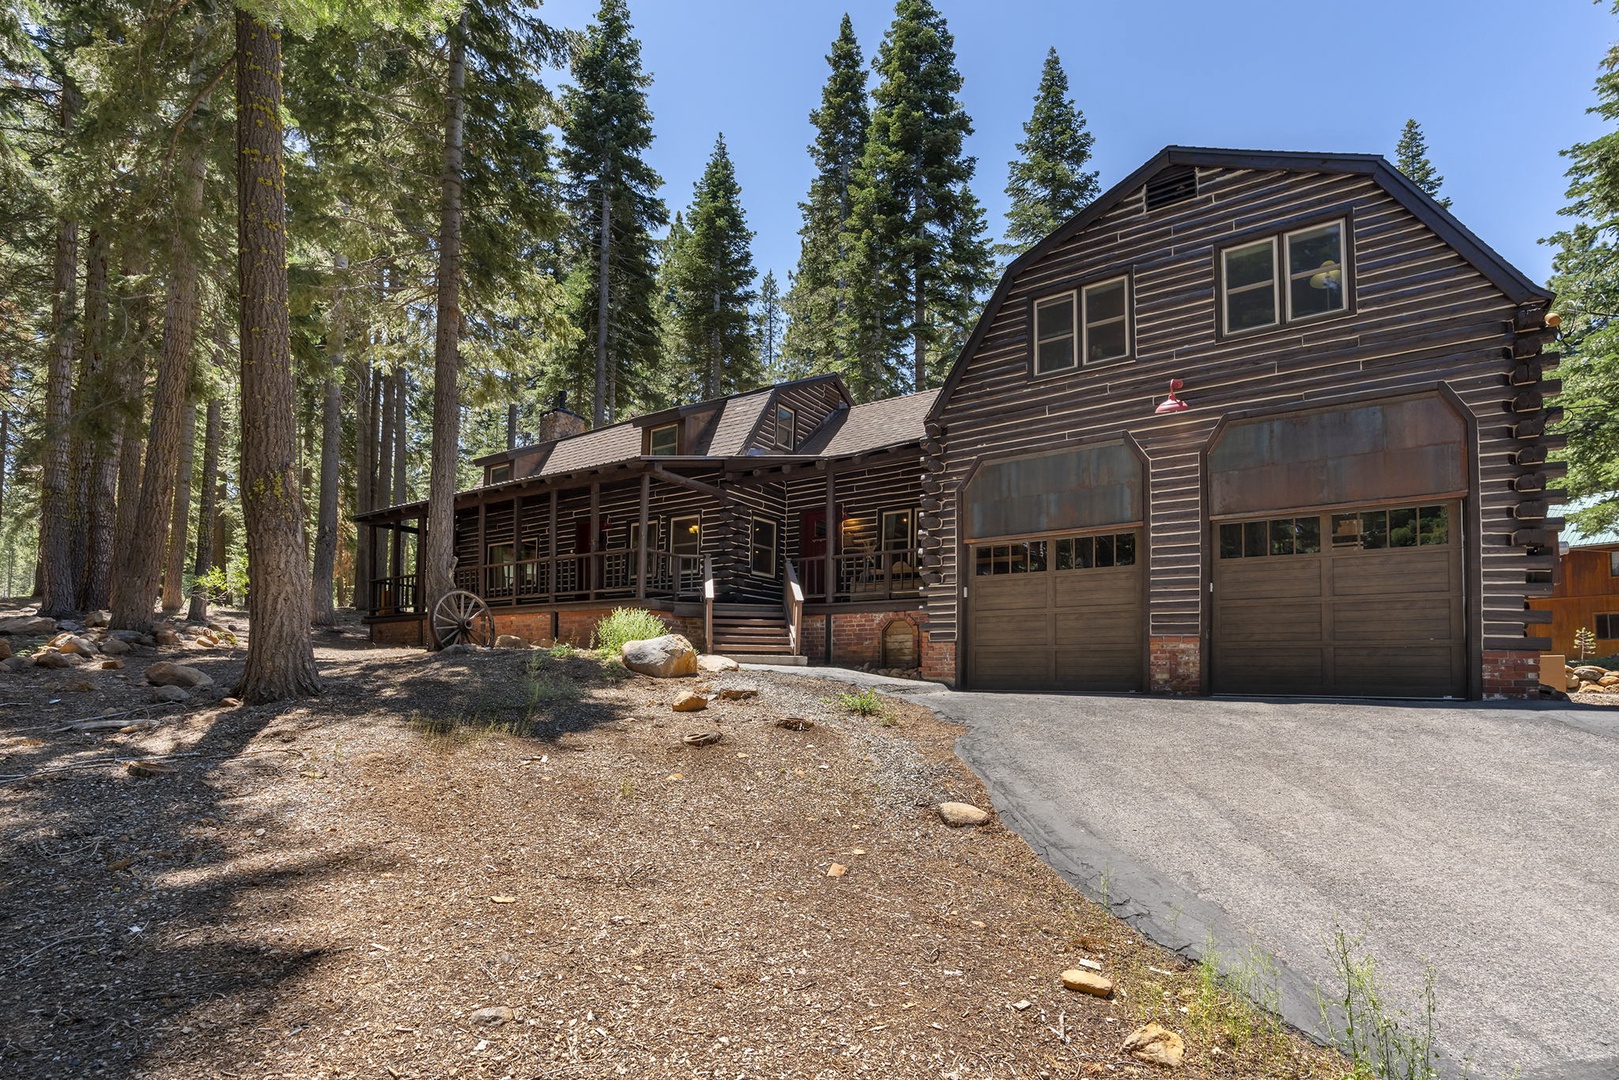 View From Street: Tahoe Donner Log Cabin